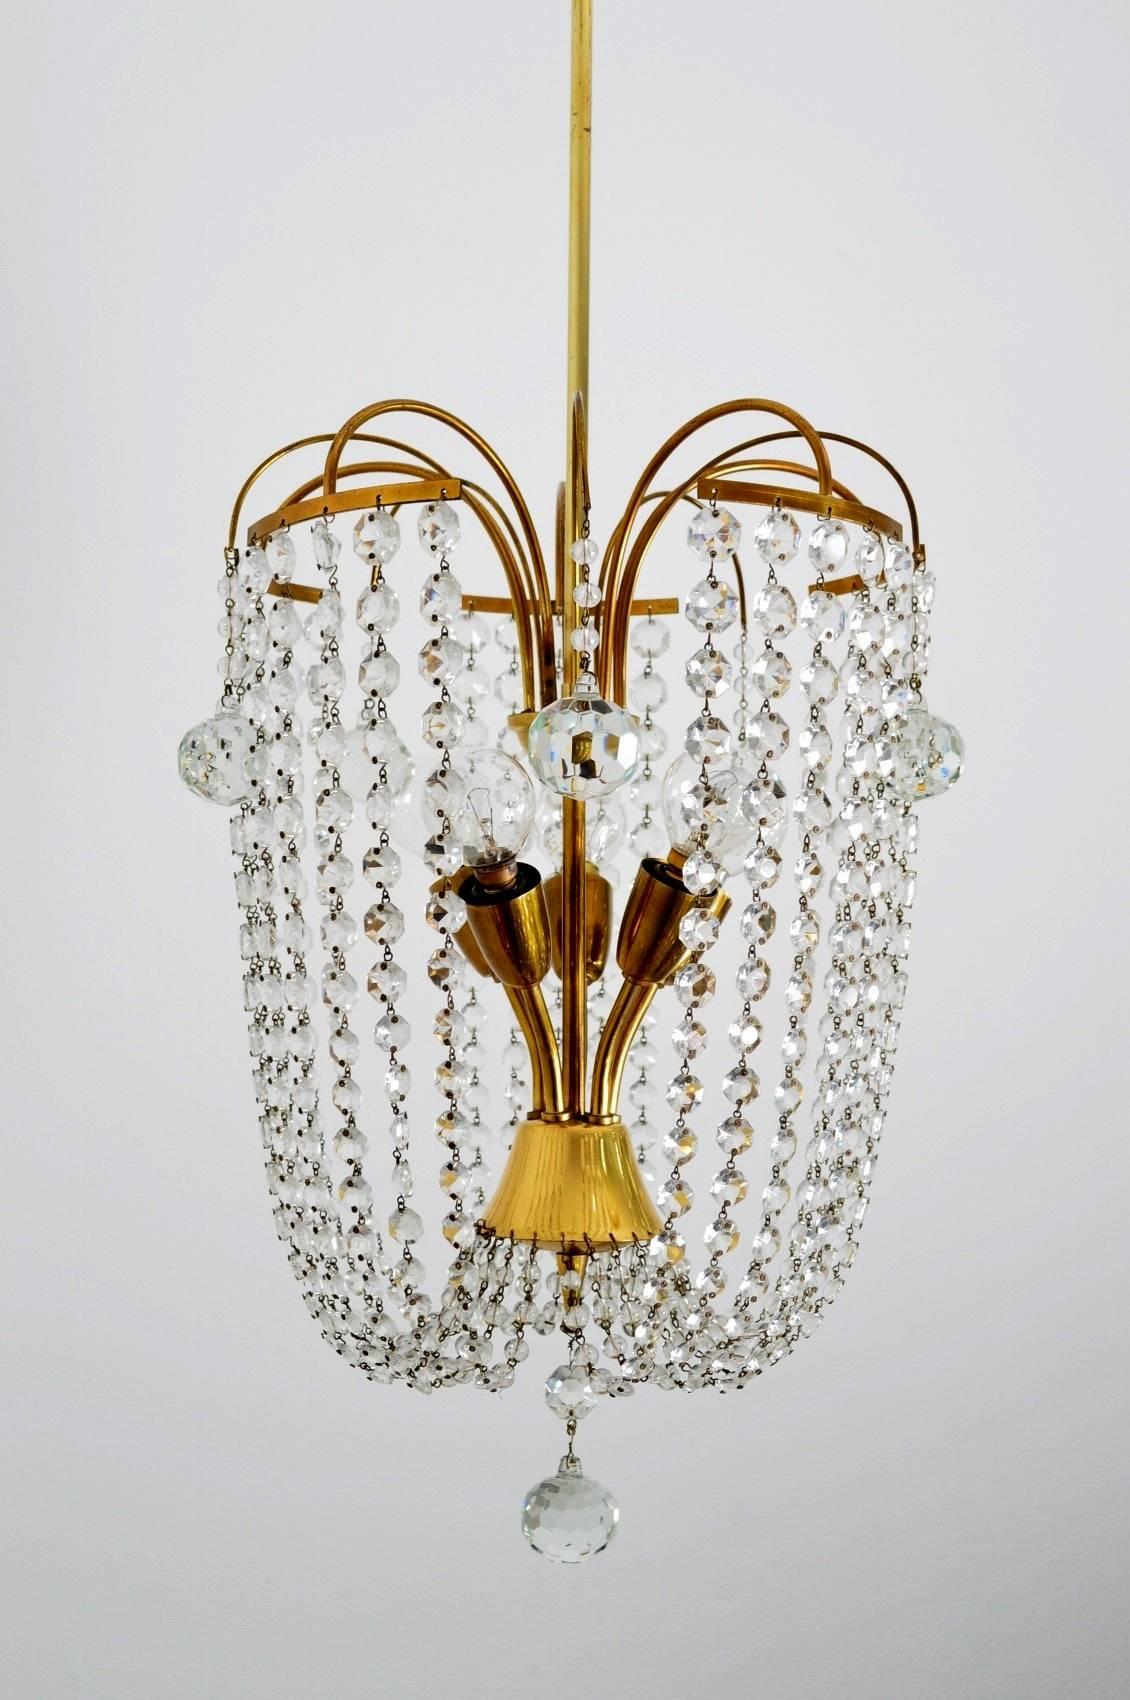 Austrian Midcentury Crystal Glass and Brass Chandelier, 1950s For Sale 2